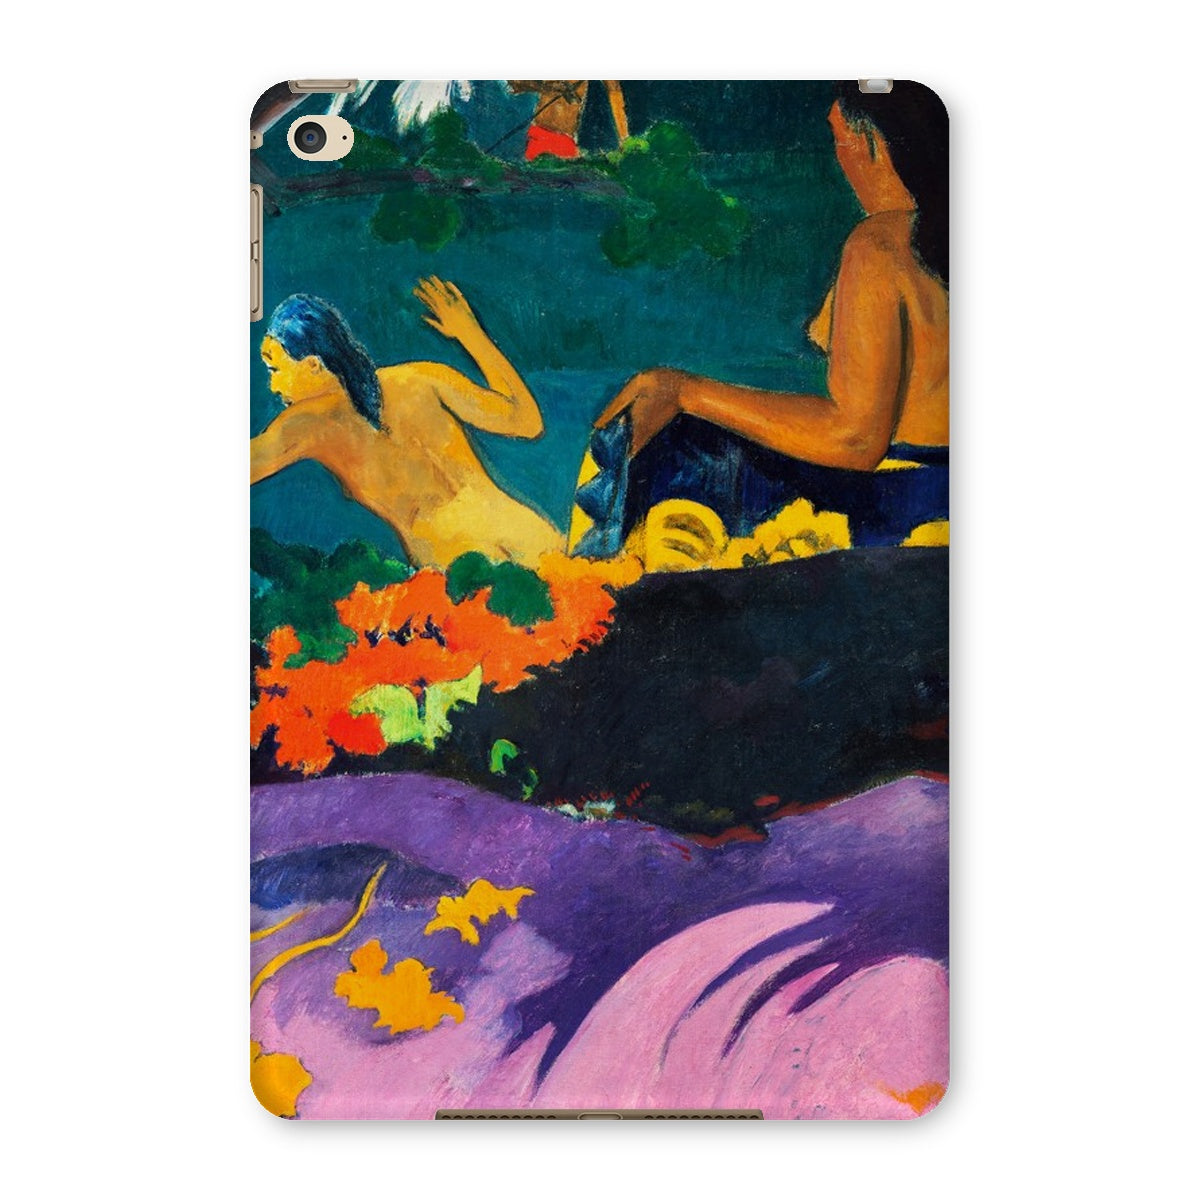 Gauguin - By the Sea Tablet-Hülle - Atopurinto